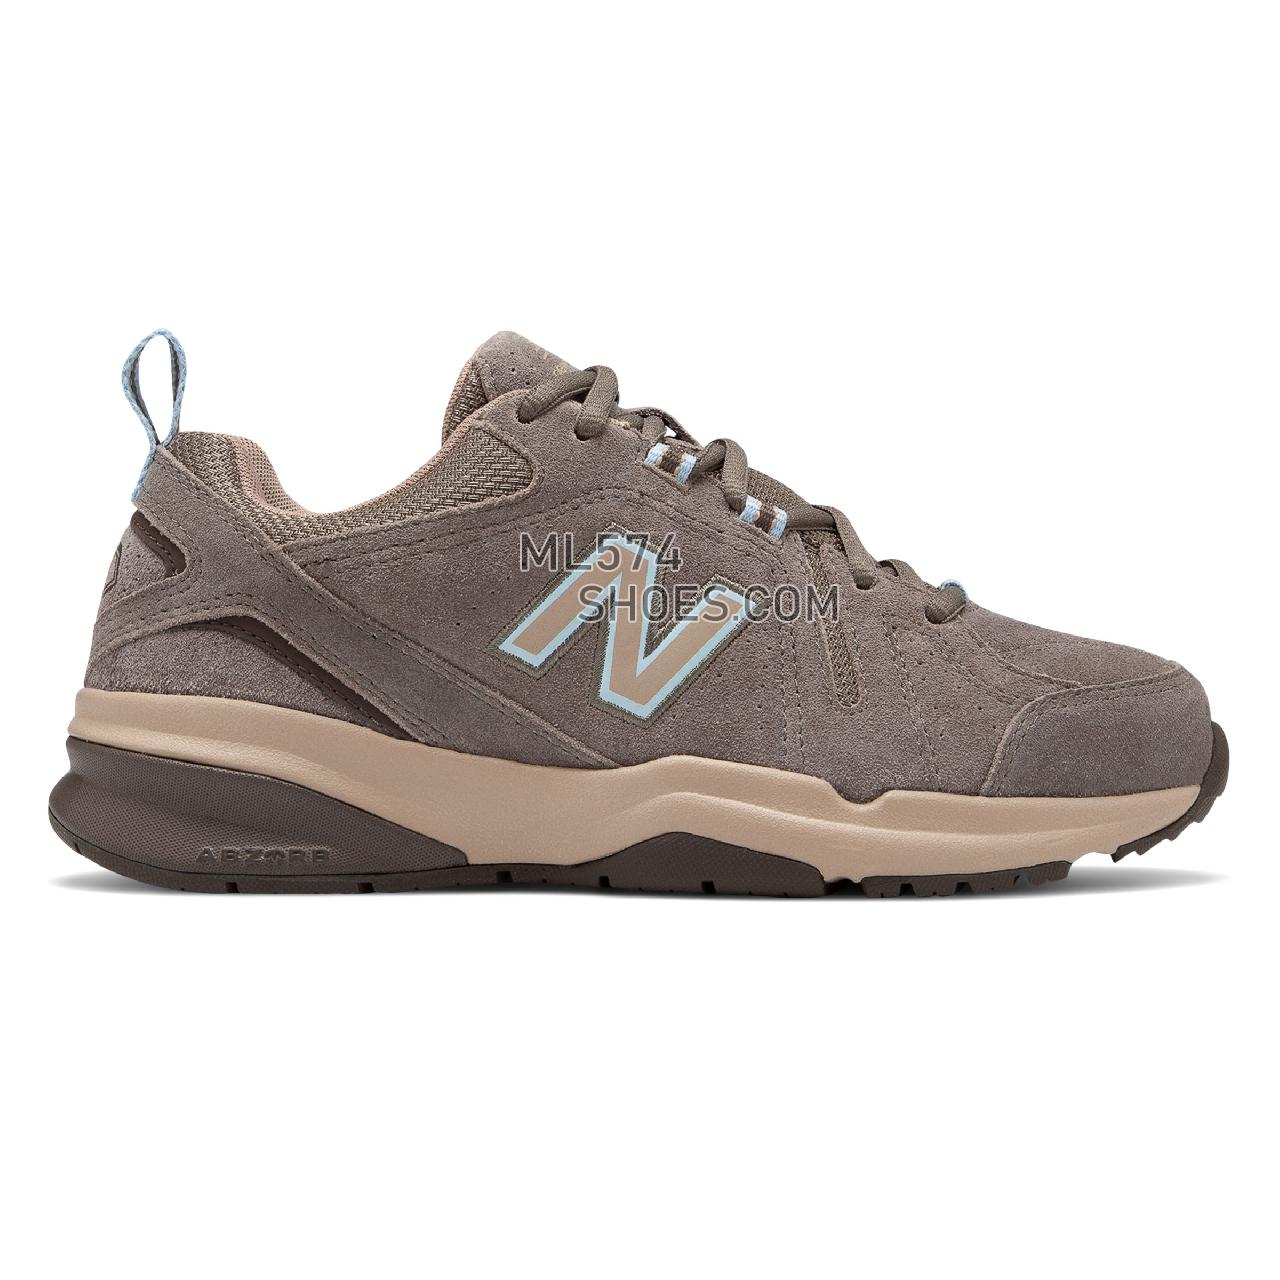 New Balance 608v5 - Women's Everyday Trainers - Bungee Chocolate with Brick and Wren - WX608UB5